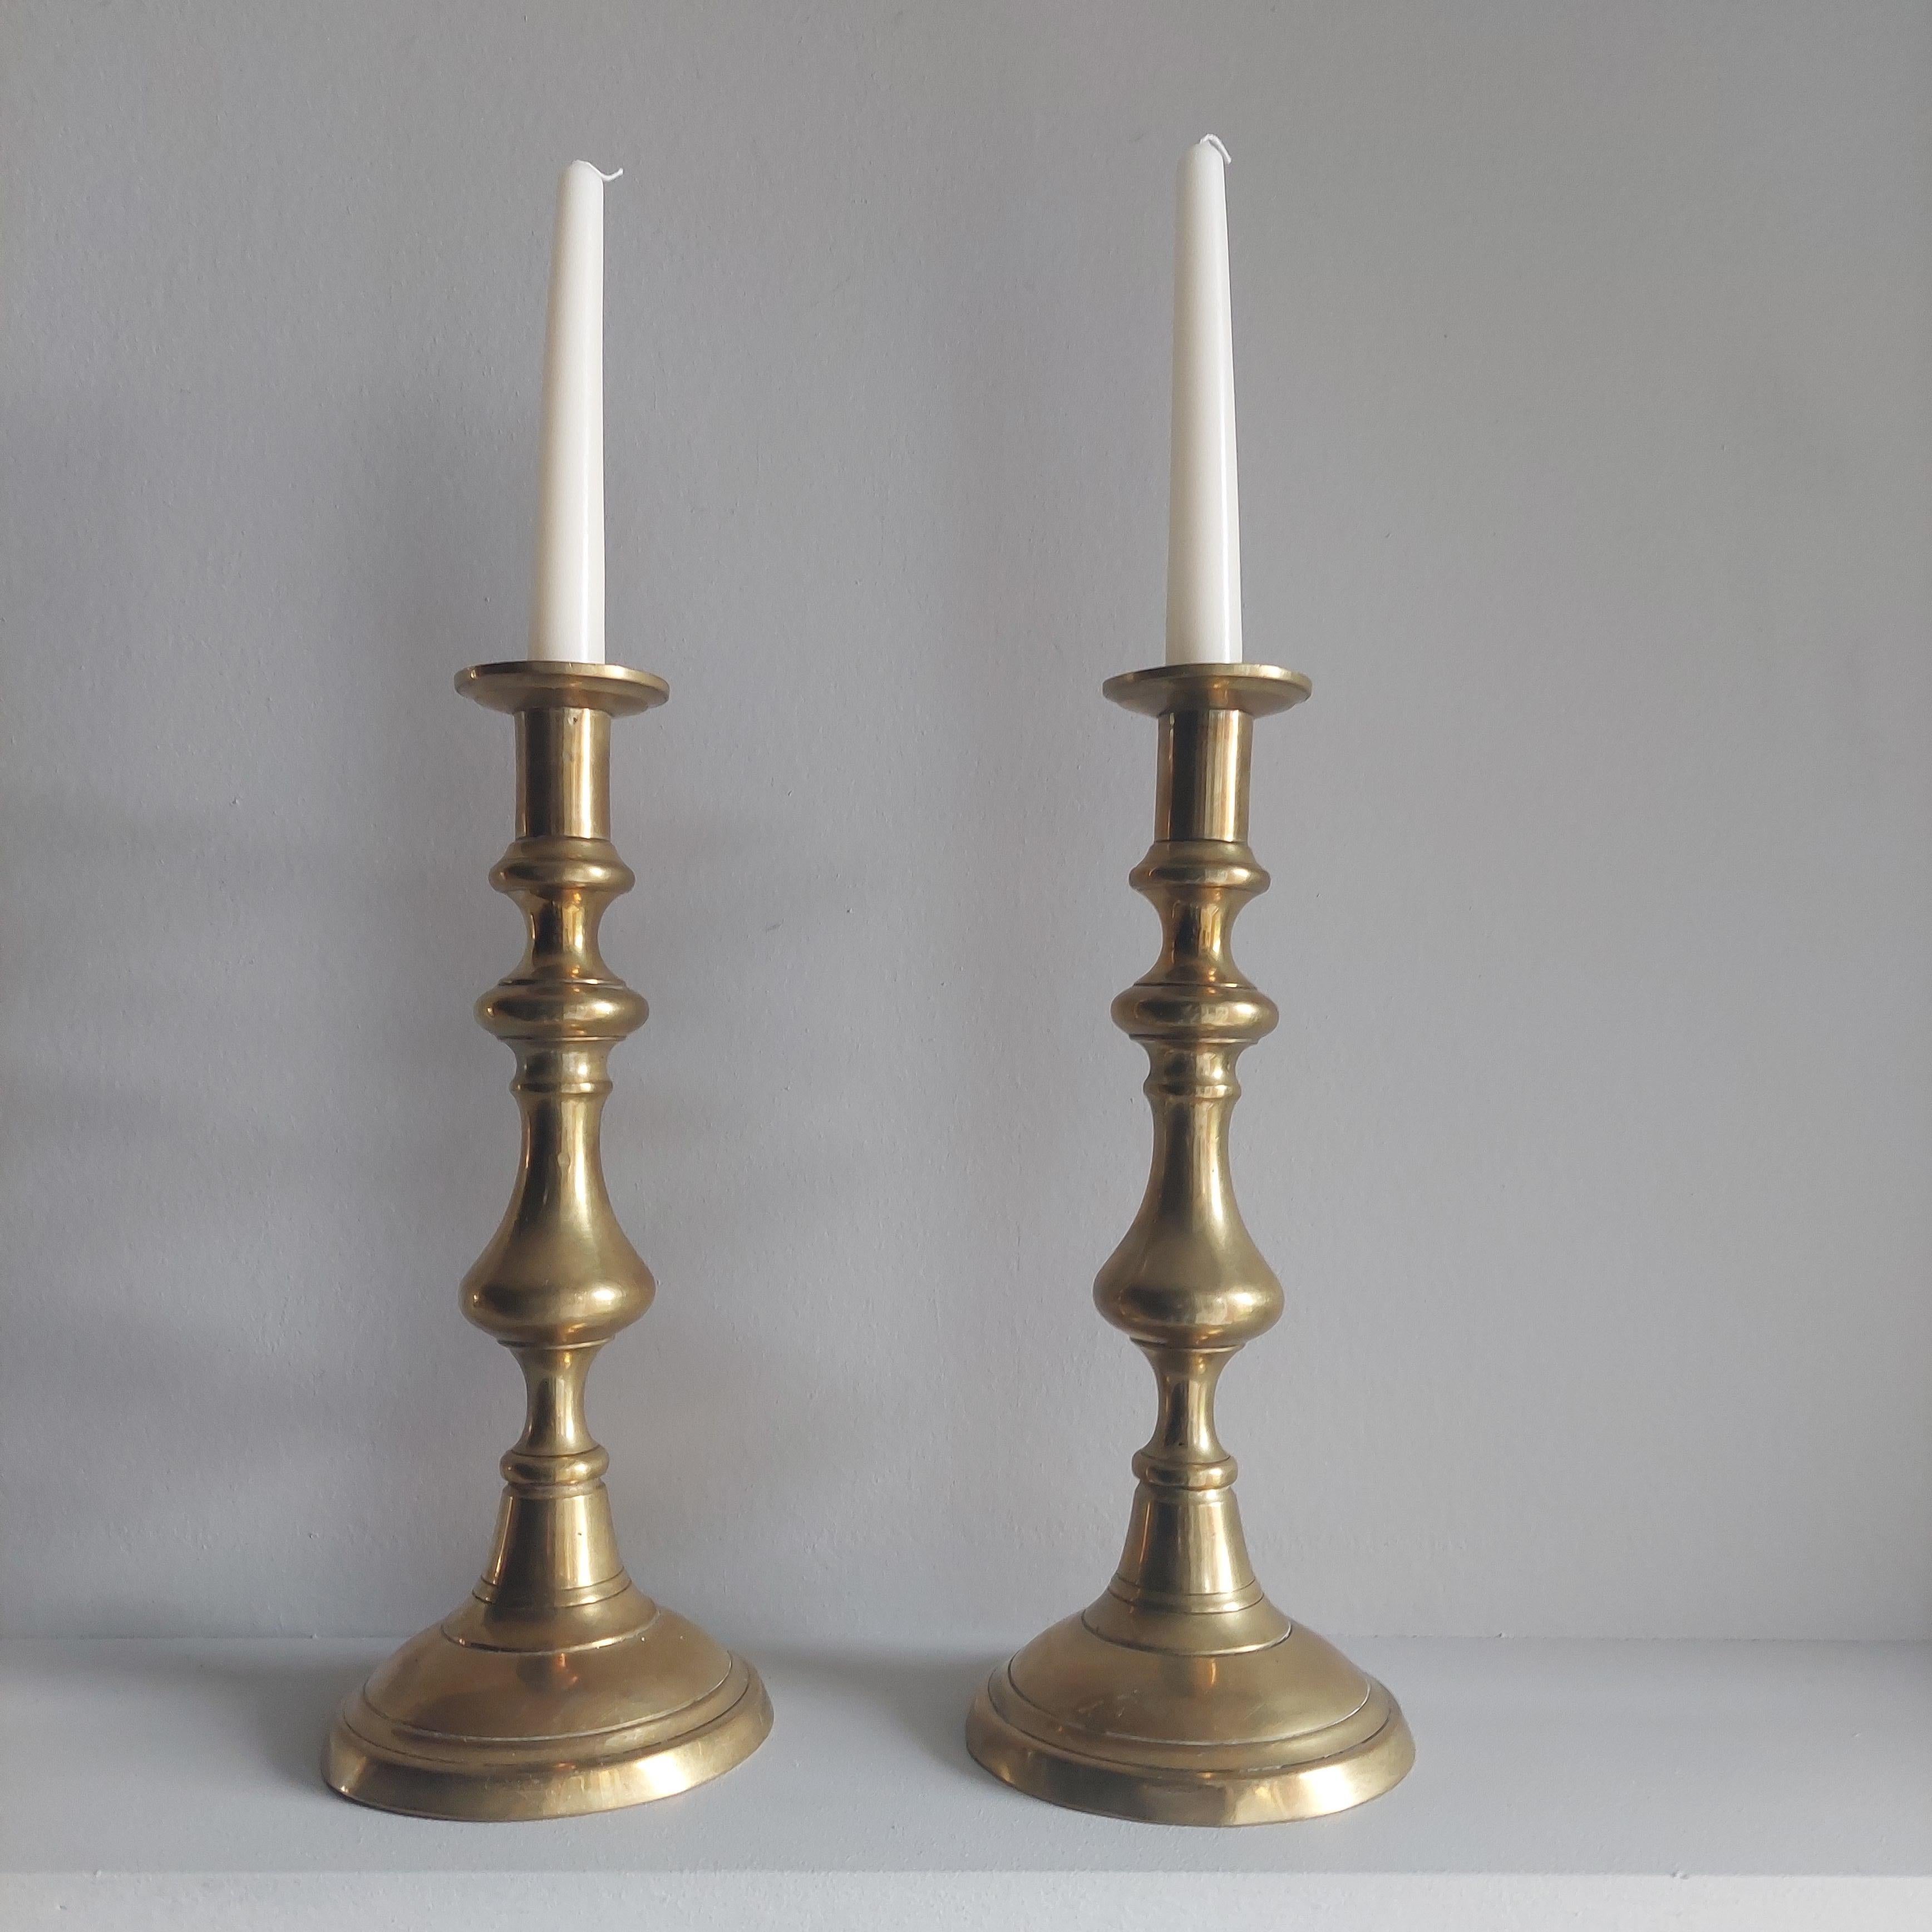 Pair of antique Tall Victorian brass candlesticks (29cm)
Georgian/ Vintage Candlesticks
Set of 2
Circa 1800's.

Having a shaped turned column raised on a circular stepped base.
Add some elegance to your tabletop or mantel with this identical pair of